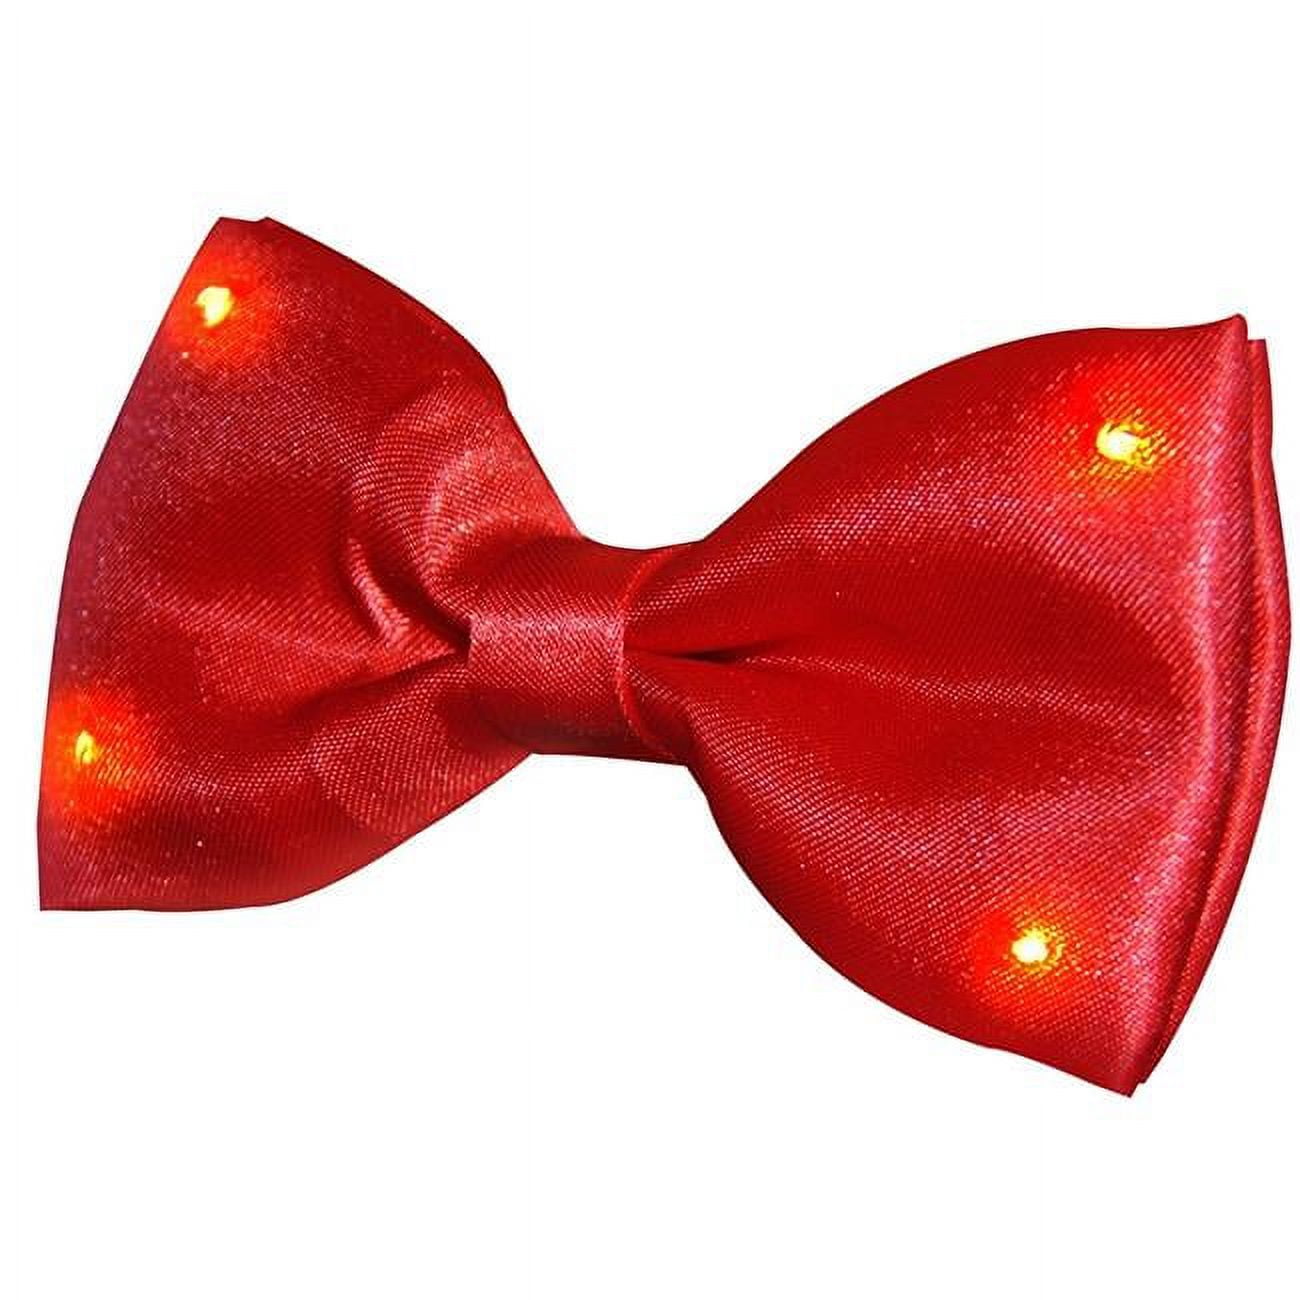 Picture of Blinkee 1588000 Red Bow Tie with LED Lights, Red